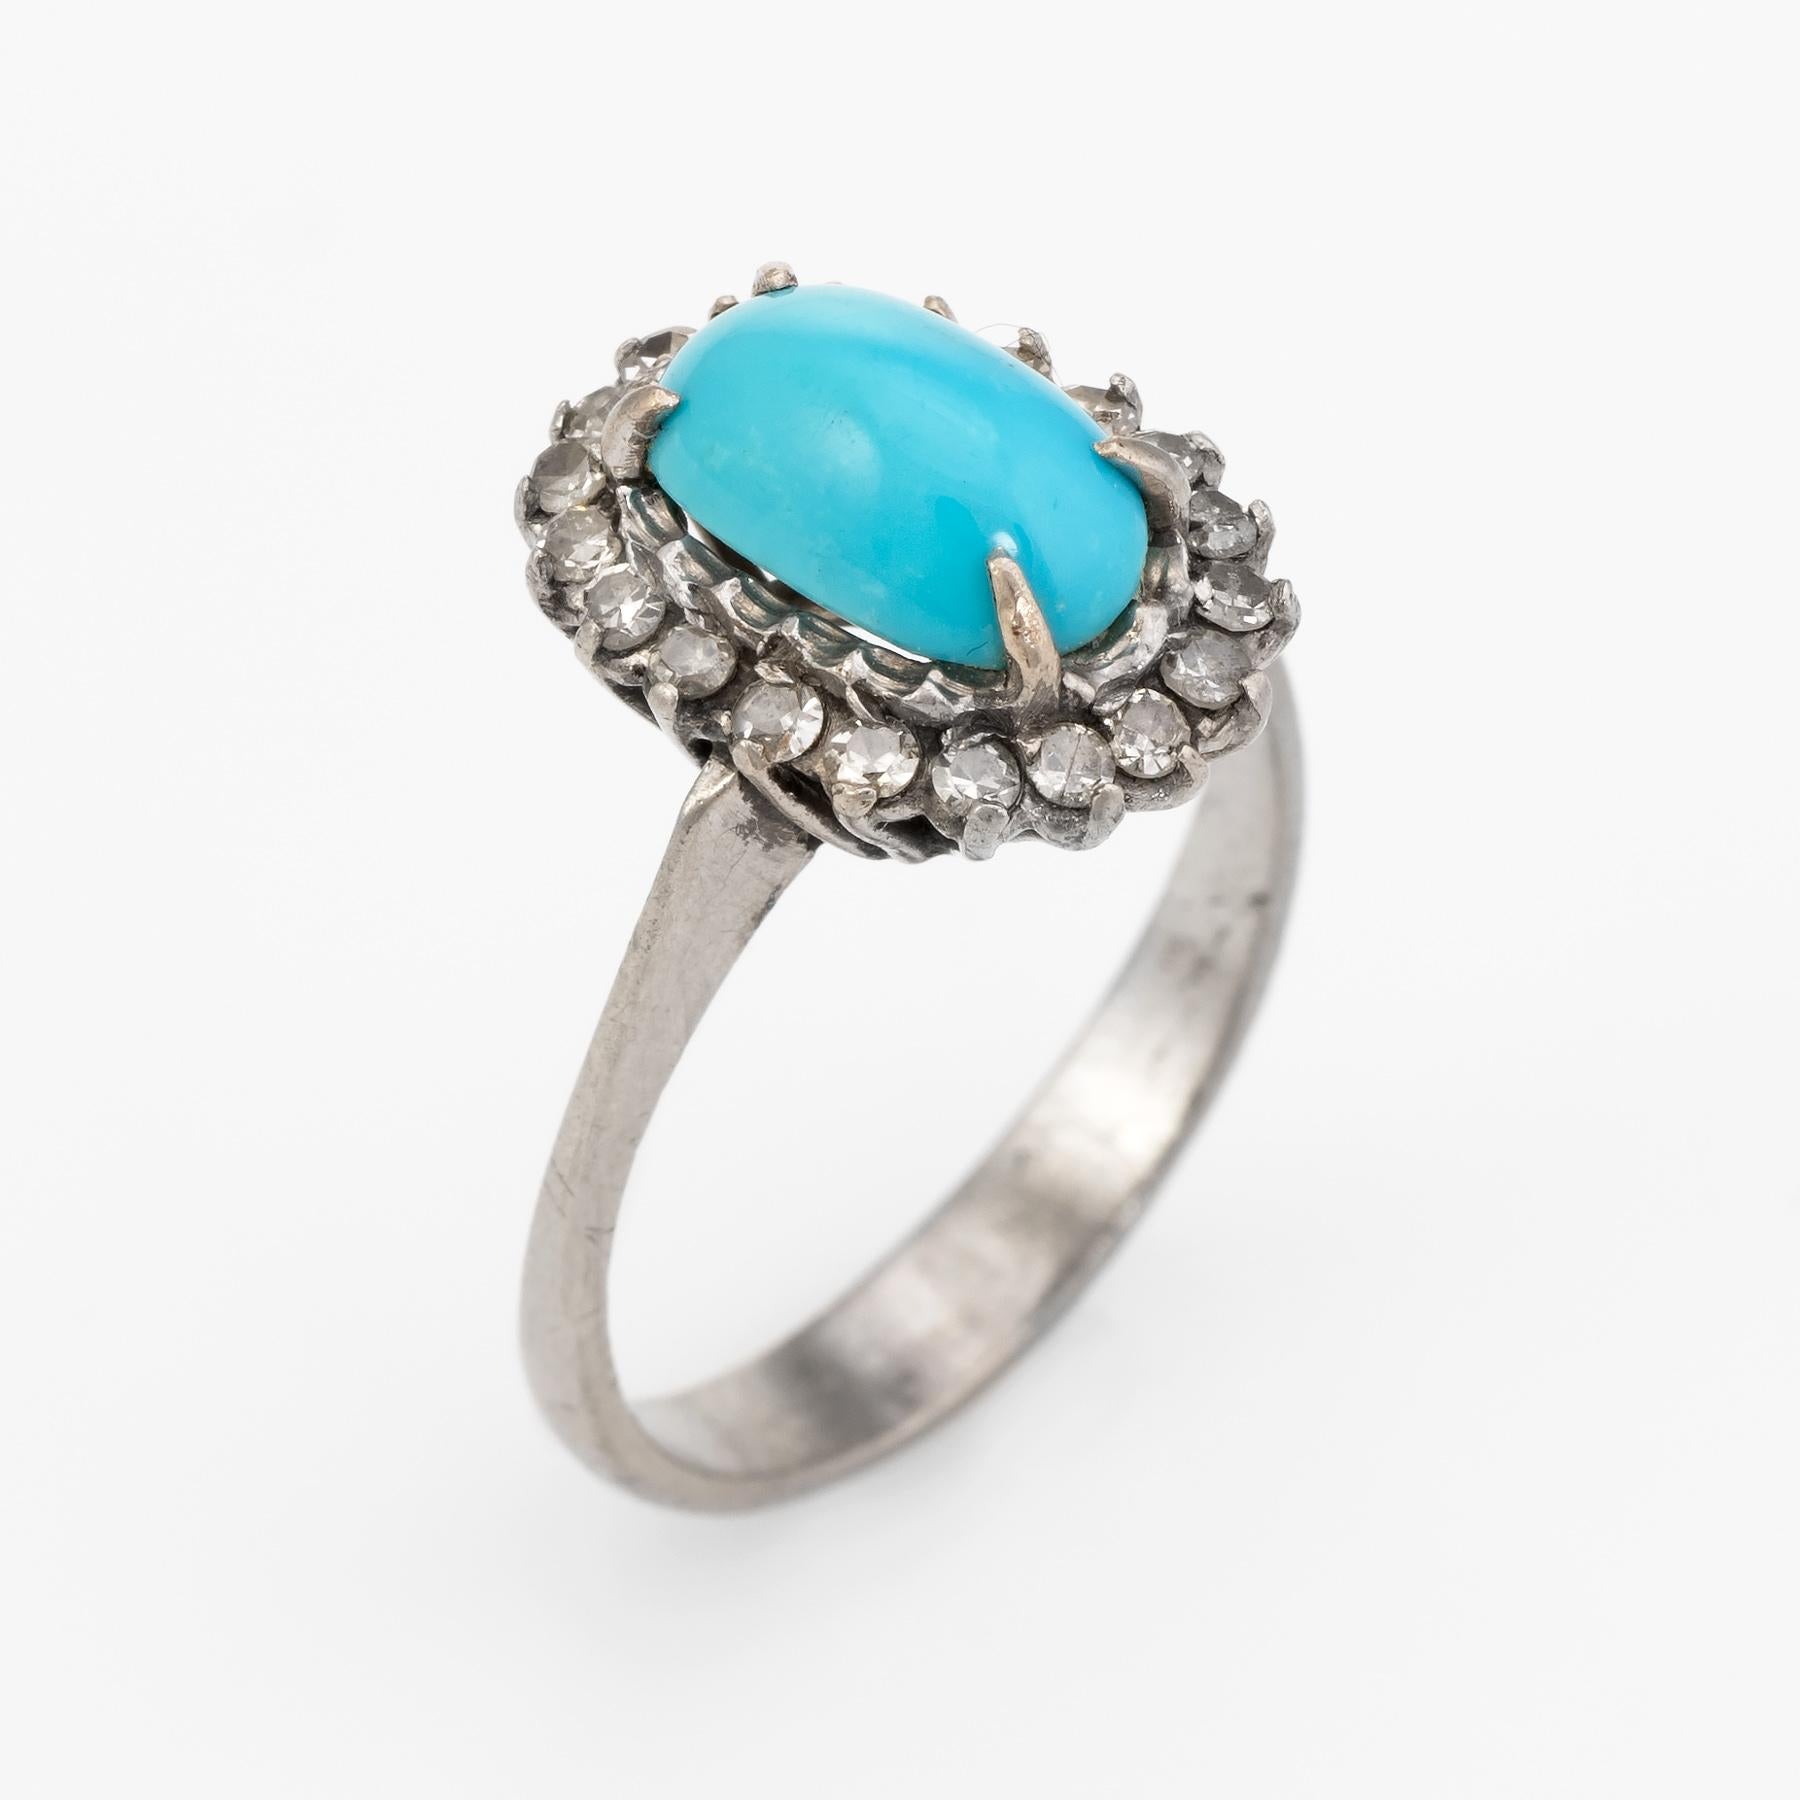 legant vintage cocktail ring (circa 1950s to 1960s), crafted in 14 karat white gold. 

Cabochon cut turquoise measures 9.75mm x 6mm (estimated at 1.75 carats), accented with 20 x 0.02 estimated single cut diamonds. The total diamond weight is